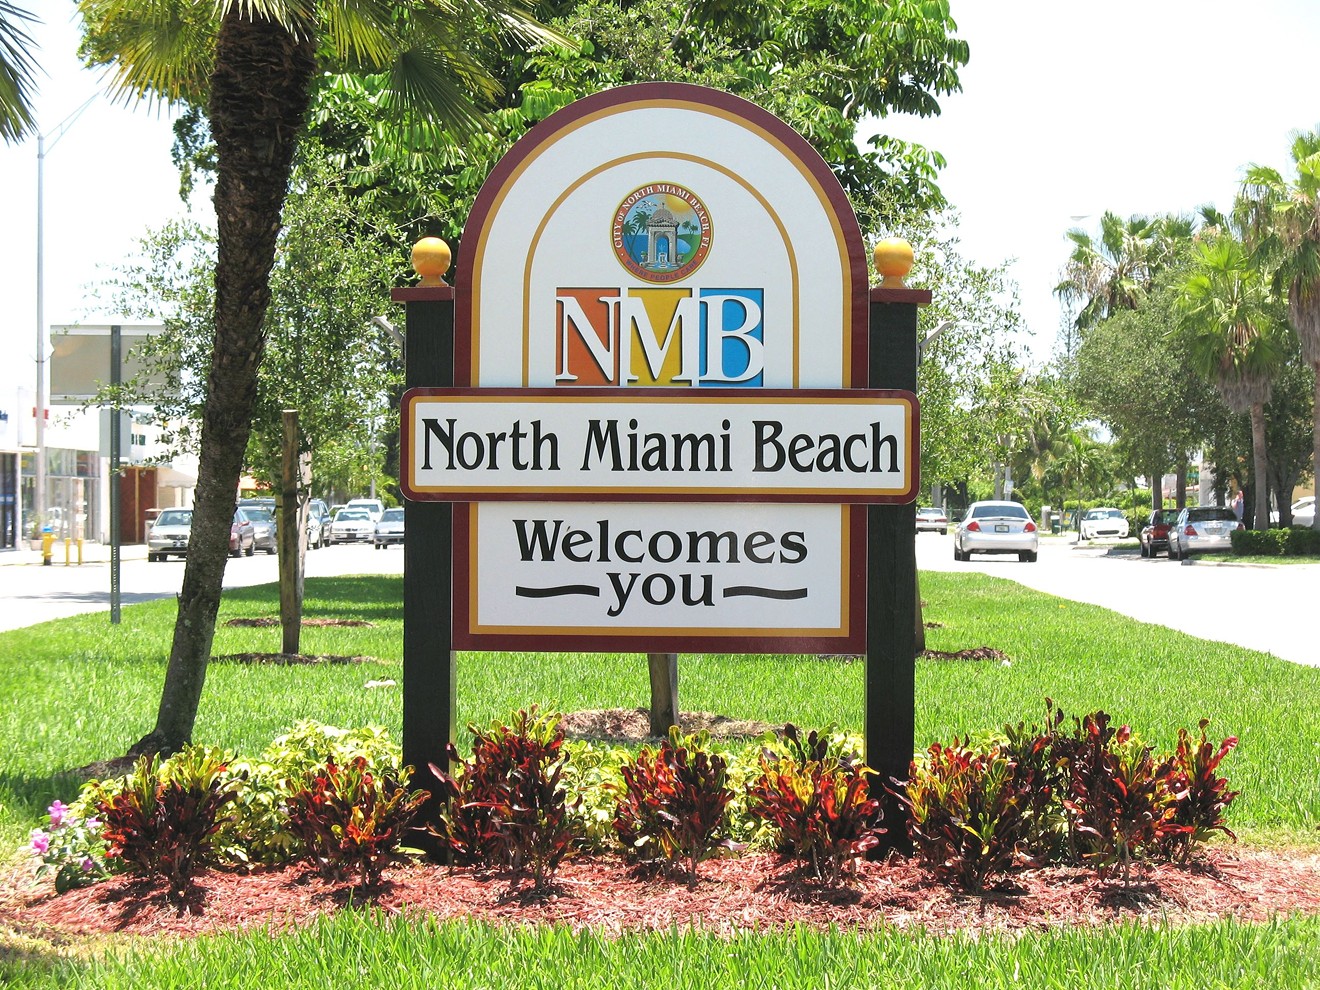 Another ethics investigation has been opened in the perennially scandal-plagued City of North Miami Beach.